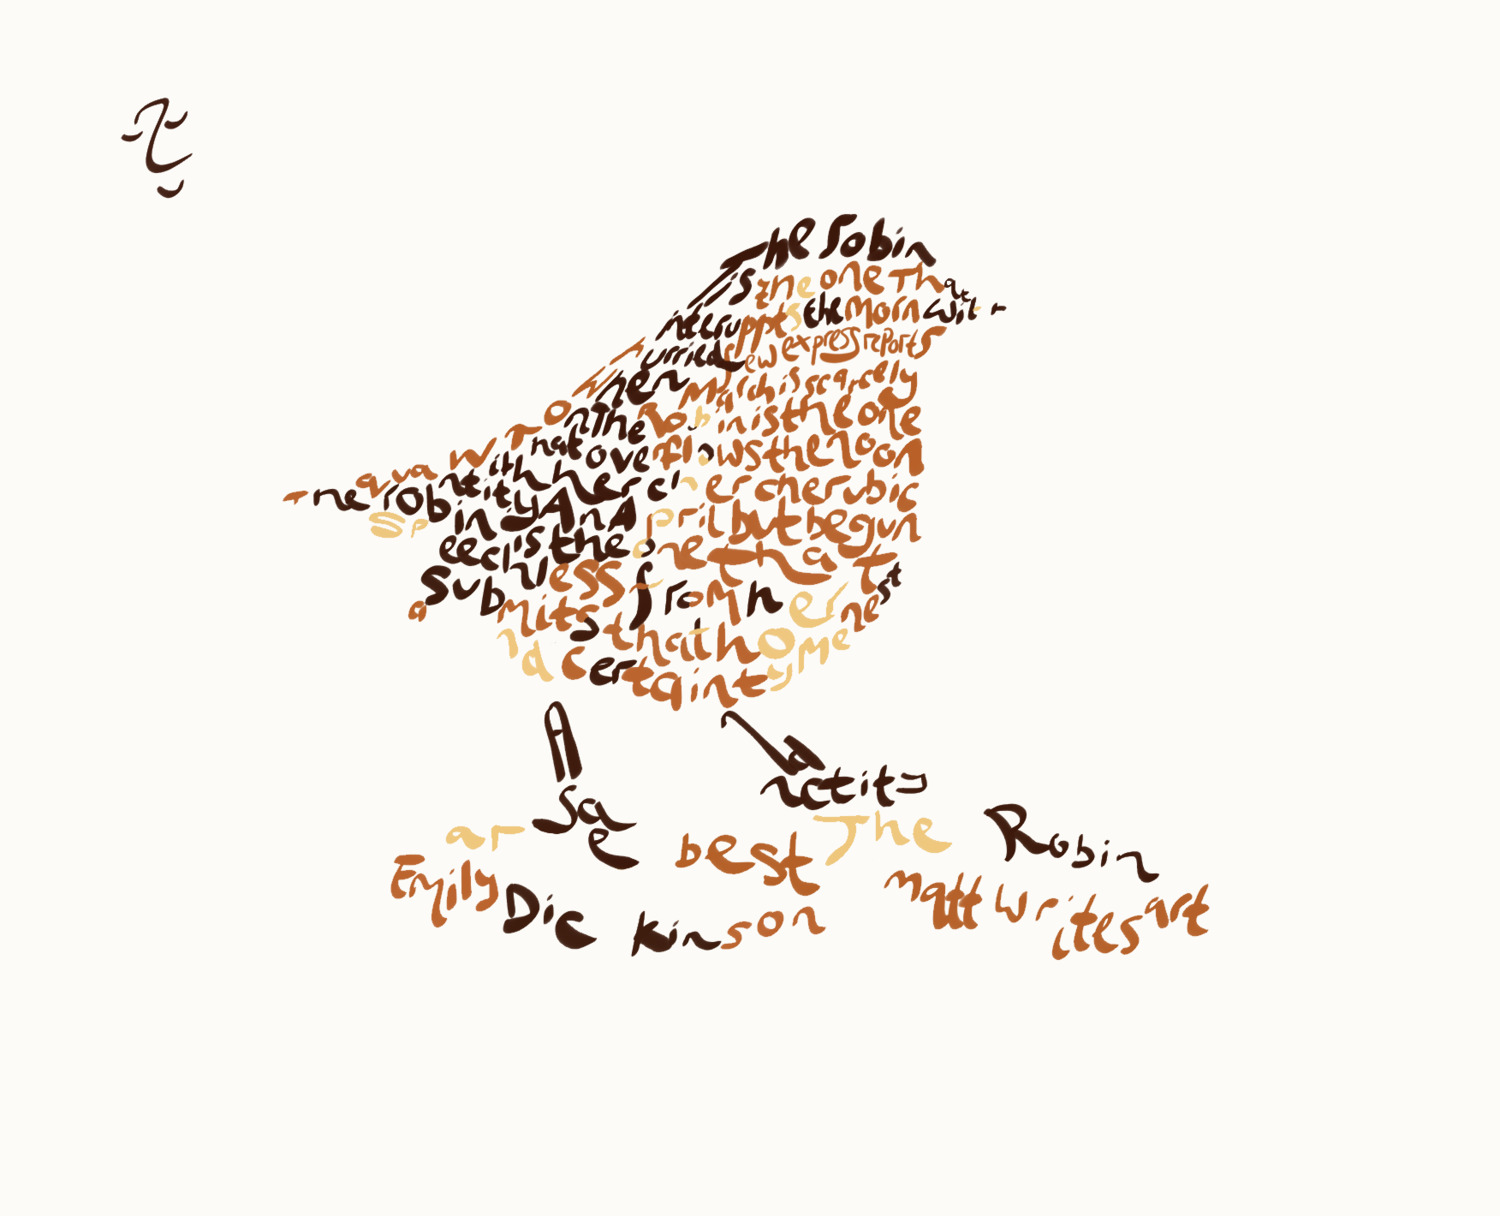 Digital portrait of a Robin, using the entirety of Emily Dickinson's 'The Robin Is The One' poem